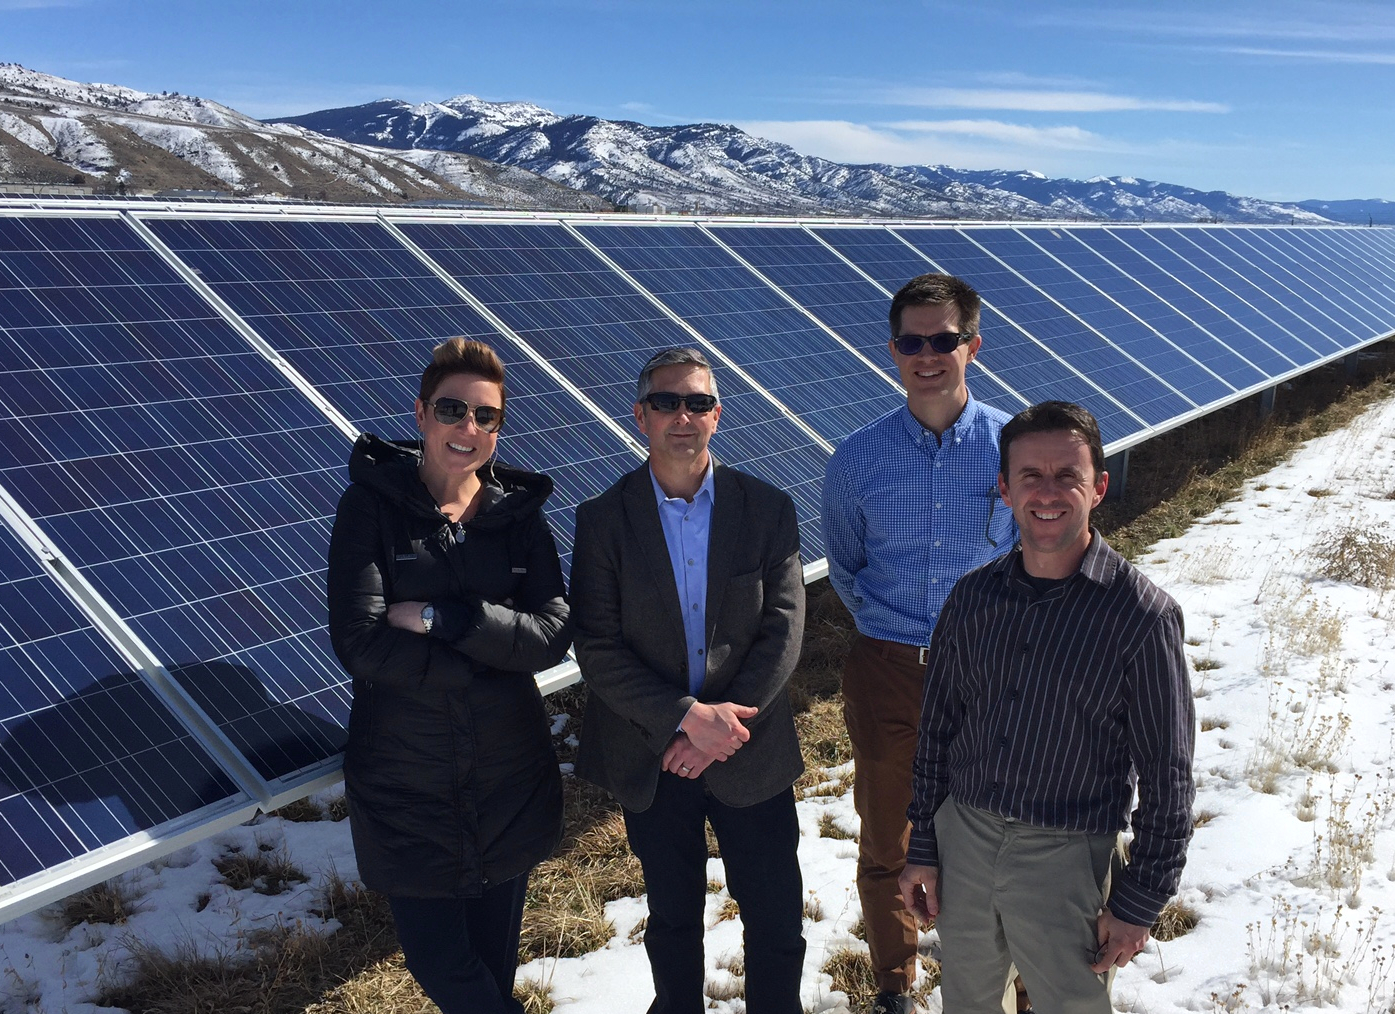  Okay, the snow hadn’t melted here quite yet, but…  We took a site visit to the Black Cap Solar Facility outside  Lakeview , after we held a public information meeting on the proposed  Blue Marmot Solar Energy Facility  in town. 